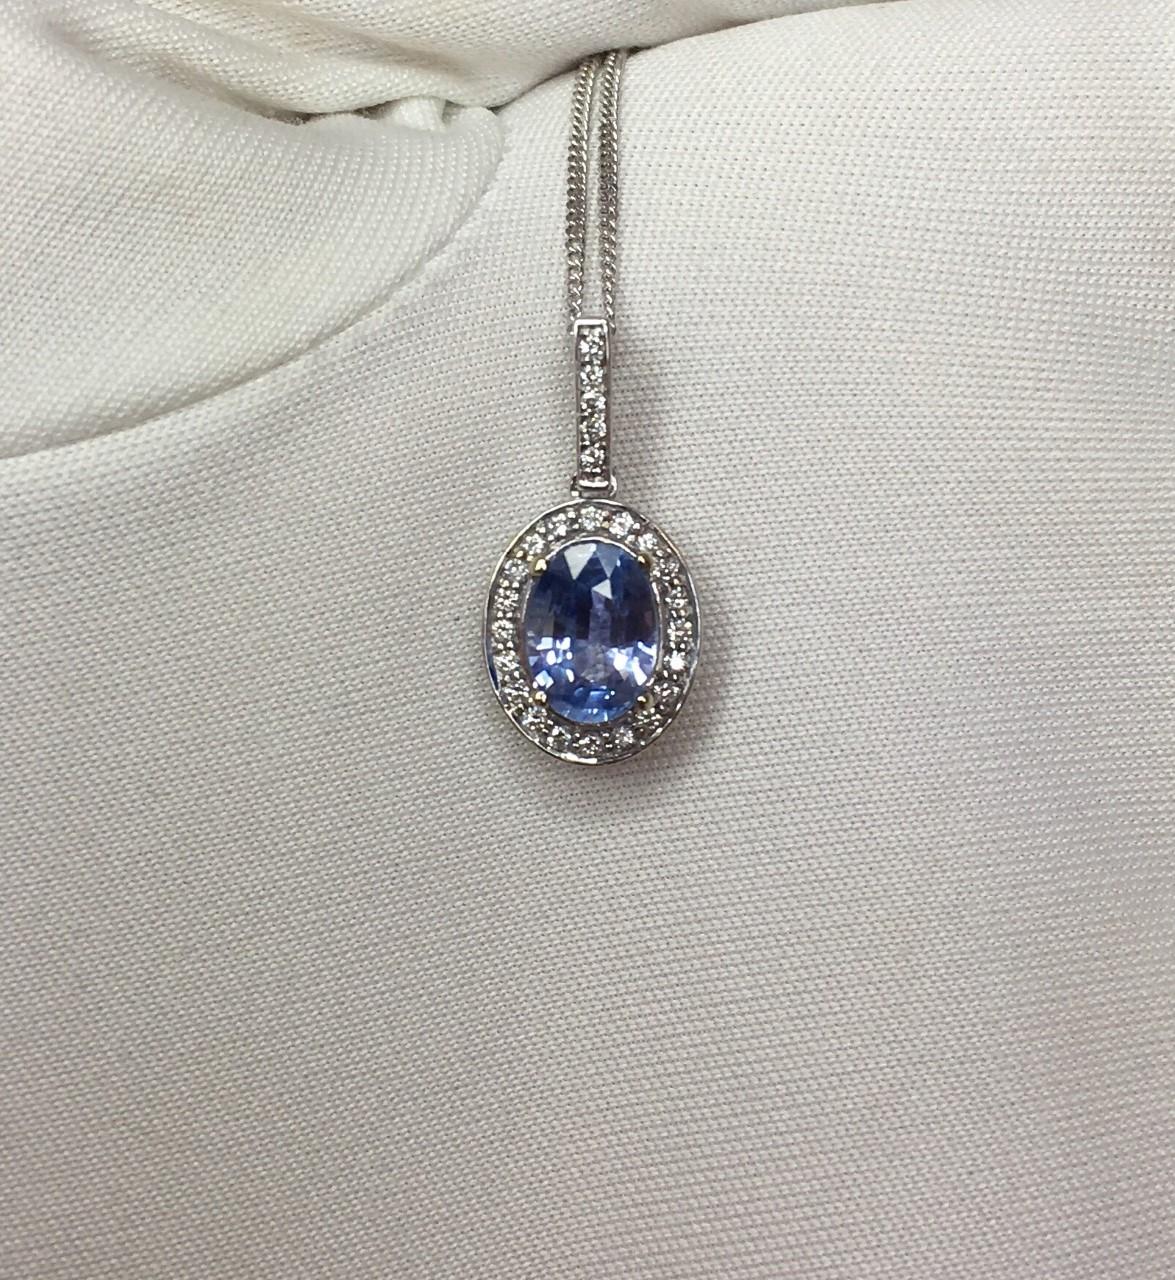 Stunning natural light blue Ceylon sapphire set in a fine 18k white gold diamond cluster pendant.

1.14 carat centre sapphire with a beautiful light blue colour and excellent clarity.

Beautiful Ceylon (Sri Lankan) stone.

The pendant is hanging on